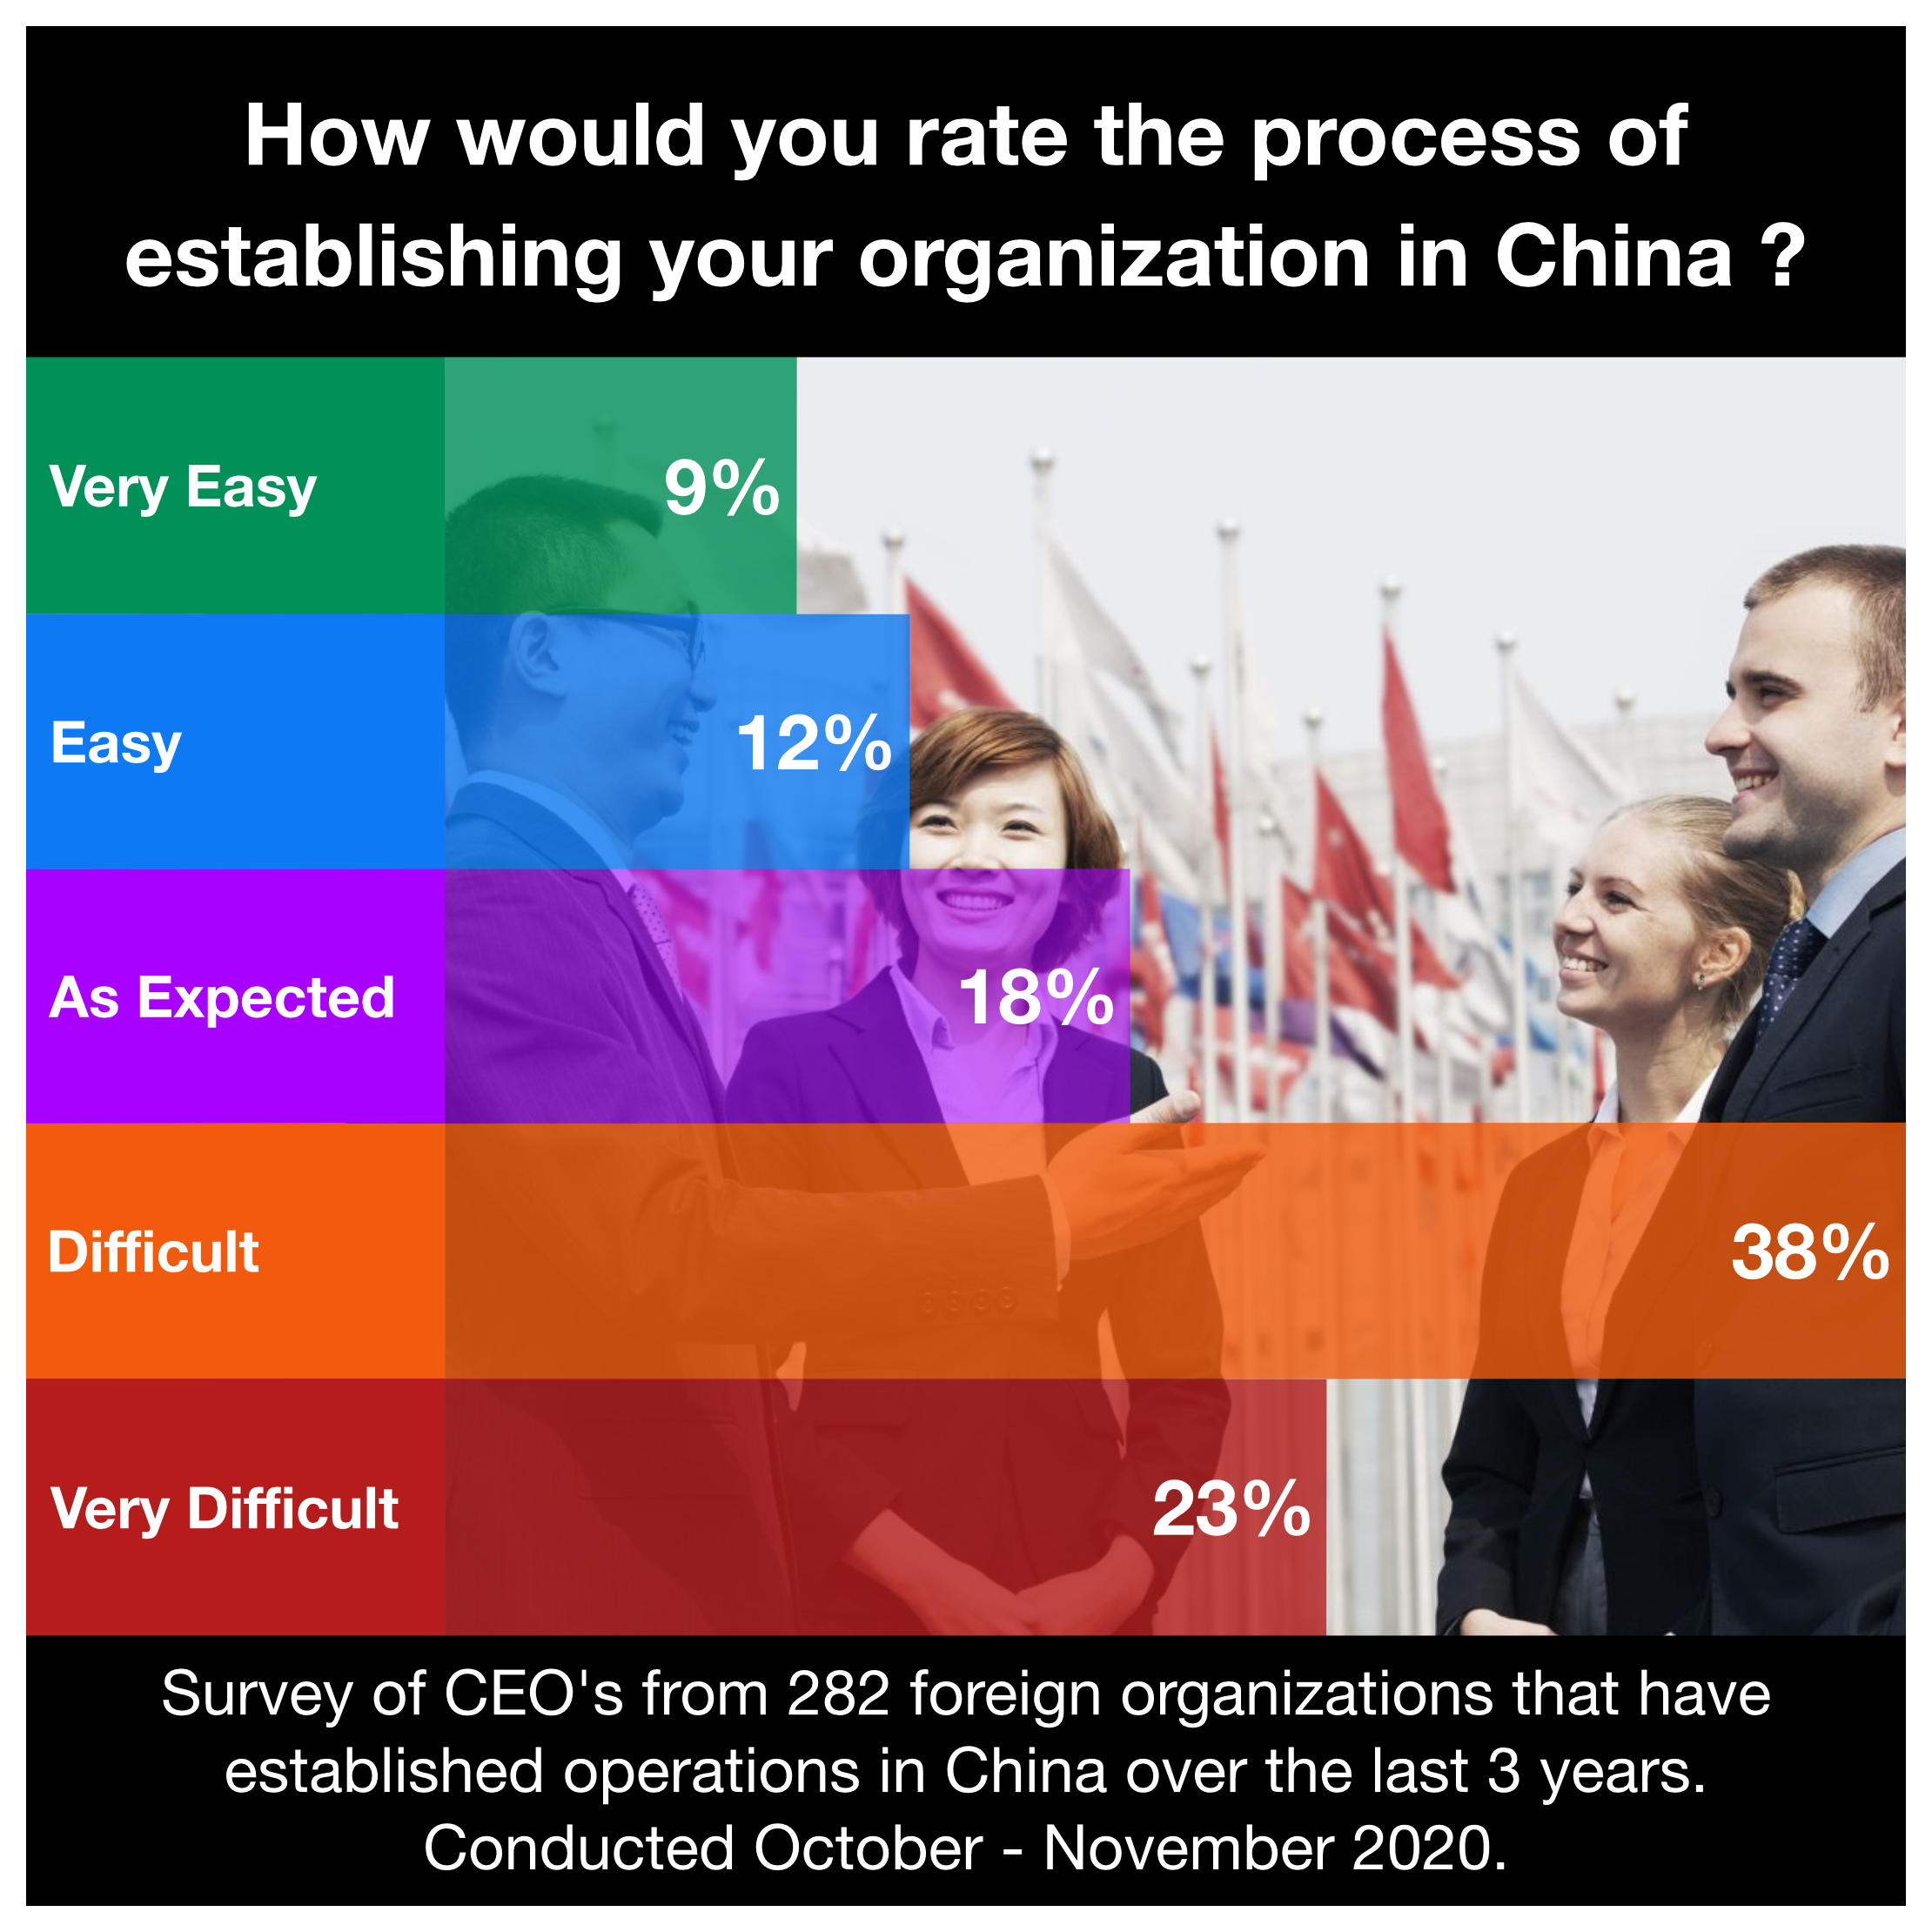 Market Research China.png